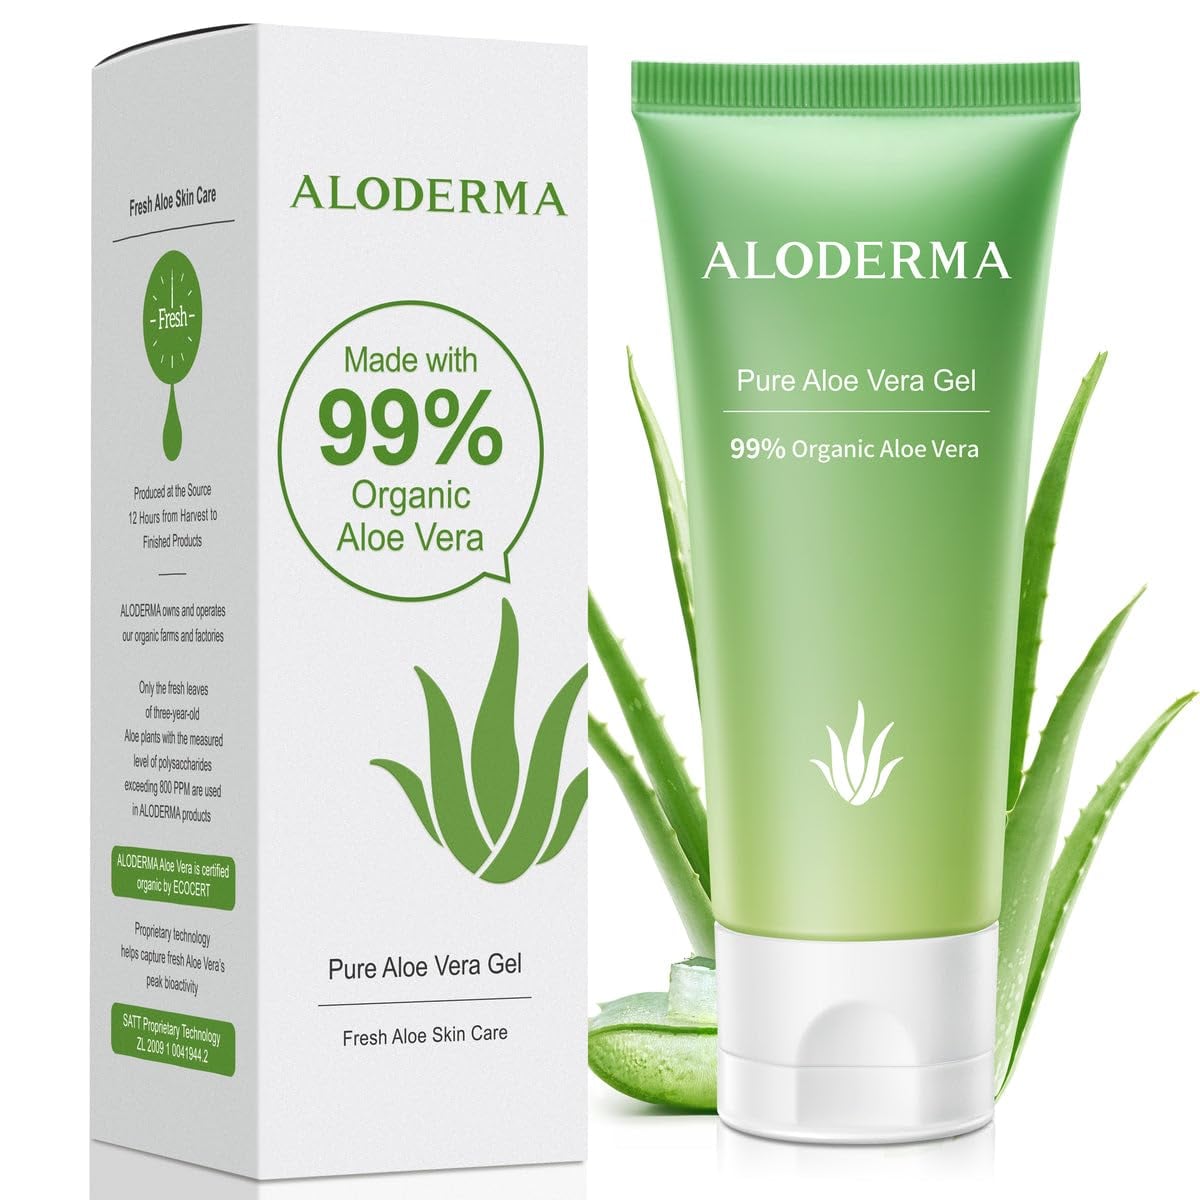 <p><a href="https://www.amazon.com/Aloderma-Pure-Aloe-Vera-Gel/dp/B075H2B962">BUY NOW</a></p><p>$8</p><p><a href="https://www.amazon.com/Aloderma-Pure-Aloe-Vera-Gel/dp/B075H2B962" class="ga-track"><strong>Aloderma 99% Organic Aloe Vera Gel</strong></a> ($8) </p><p>No matter how diligently you work to prevent sunburns, they can still happen from time to time. That's why it might be worth packing this top-selling aloe vera gel in your carry-on. It comes in a 1.5-ounce tube, so you don't have to worry about it being too big to bring on the plane. Plus, the green tube will be easy to spot in your bag, giving you quick access to cooling and soothing relief.</p>